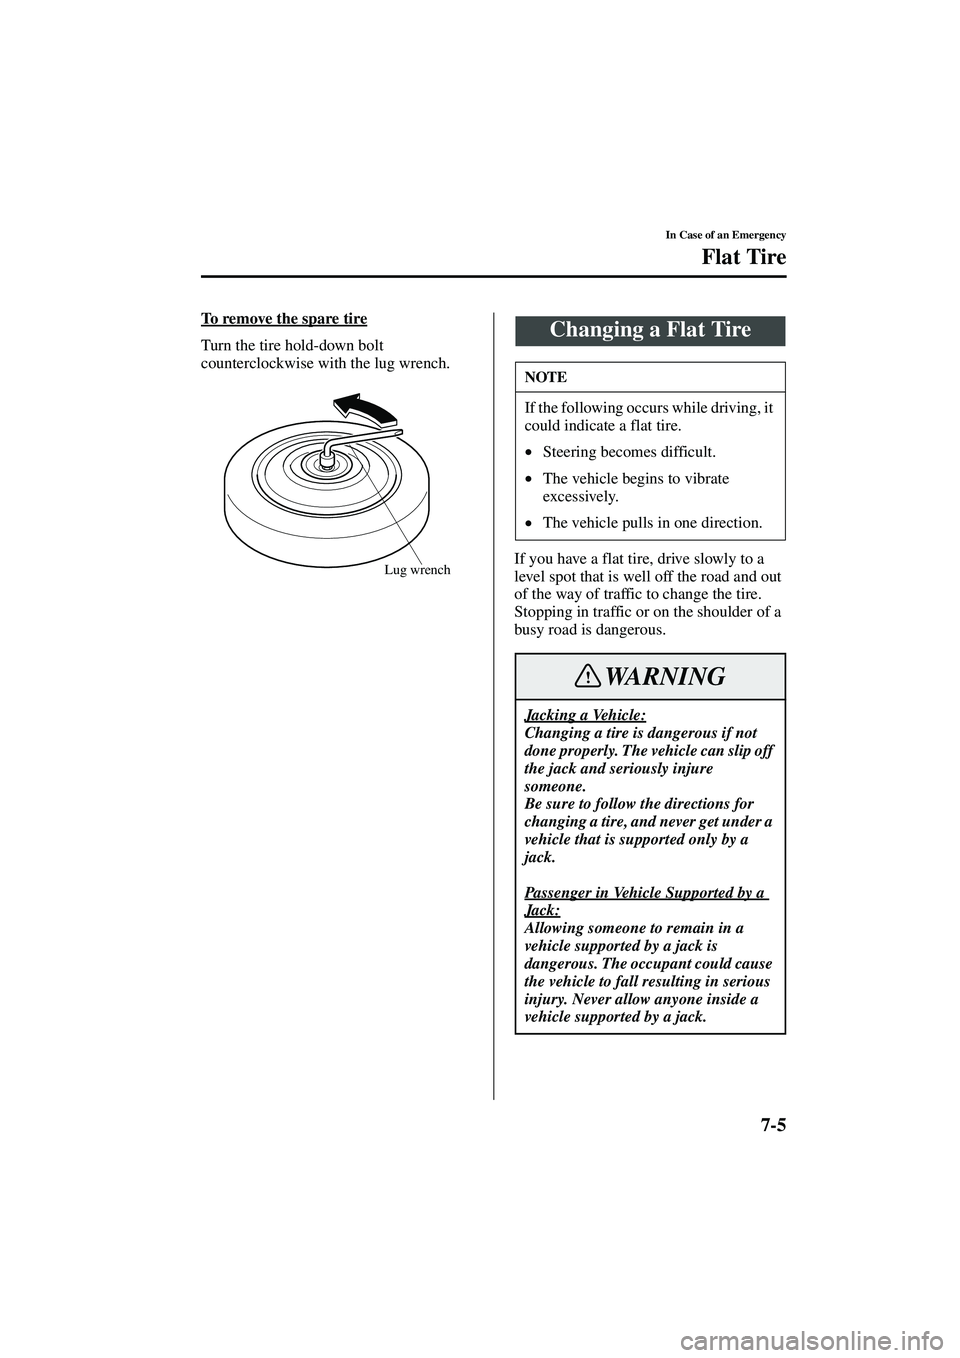 MAZDA MODEL MX-5 MIATA 2004  Owners Manual 7-5
In Case of an Emergency
Flat Tire
Form No. 8S15-EA-03G
To remove the spare tire
Turn the tire hold-down bolt 
counterclockwise with the lug wrench.If you have a flat tire, drive slowly to a 
level